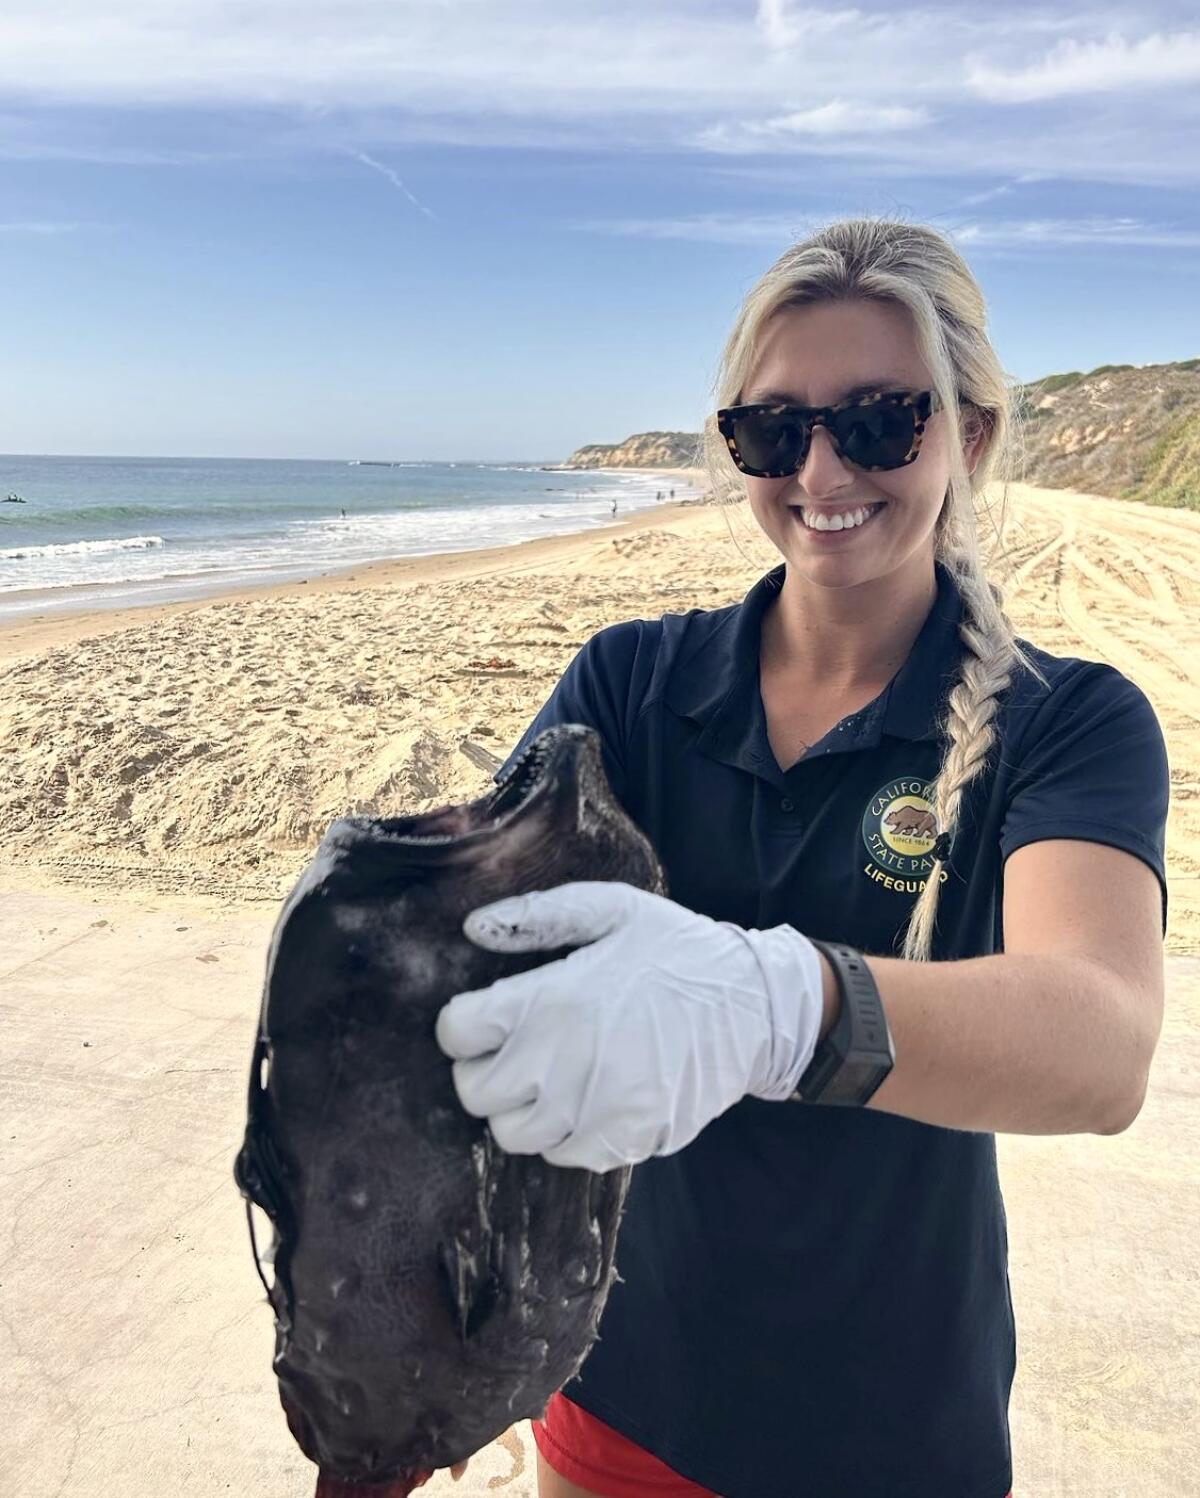 Seasonal lifeguard Sierra Fockler discovered a 14-inch Pacific footballfish on Oct. 13. at Crystal Cove State Park.